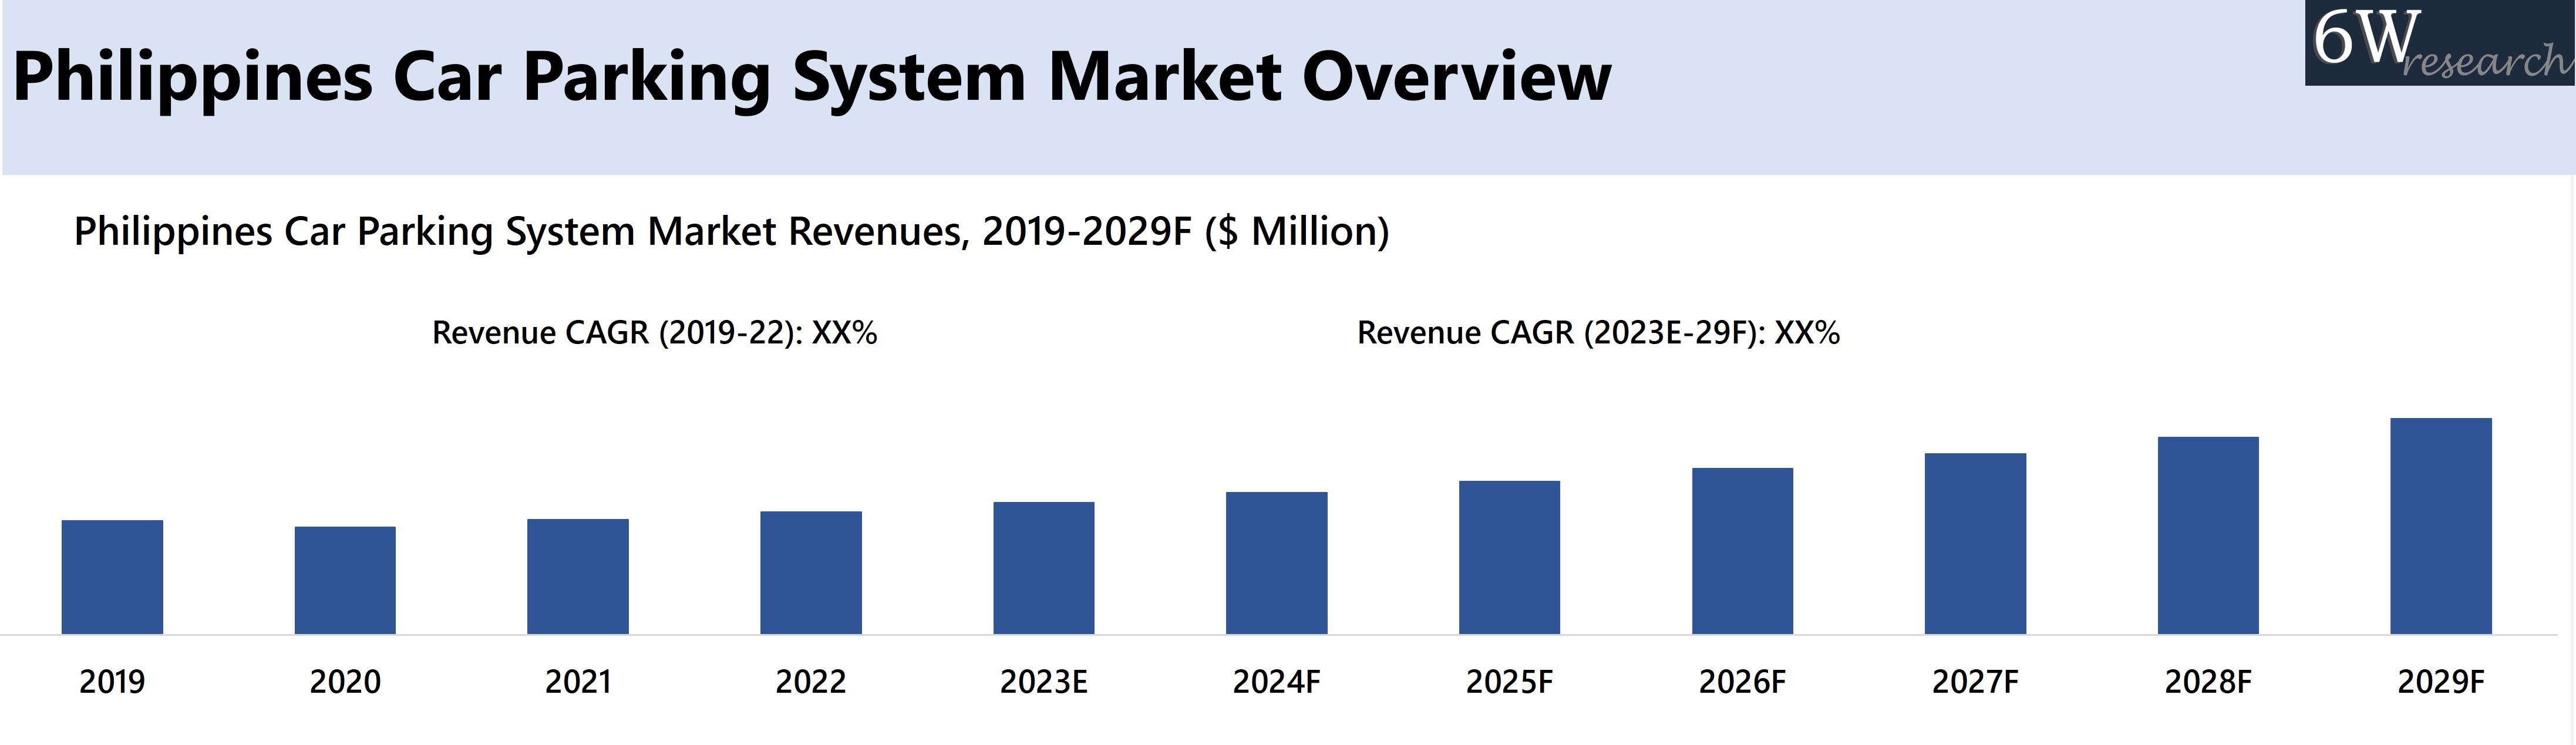 Philippines Car Parking System Market Overview